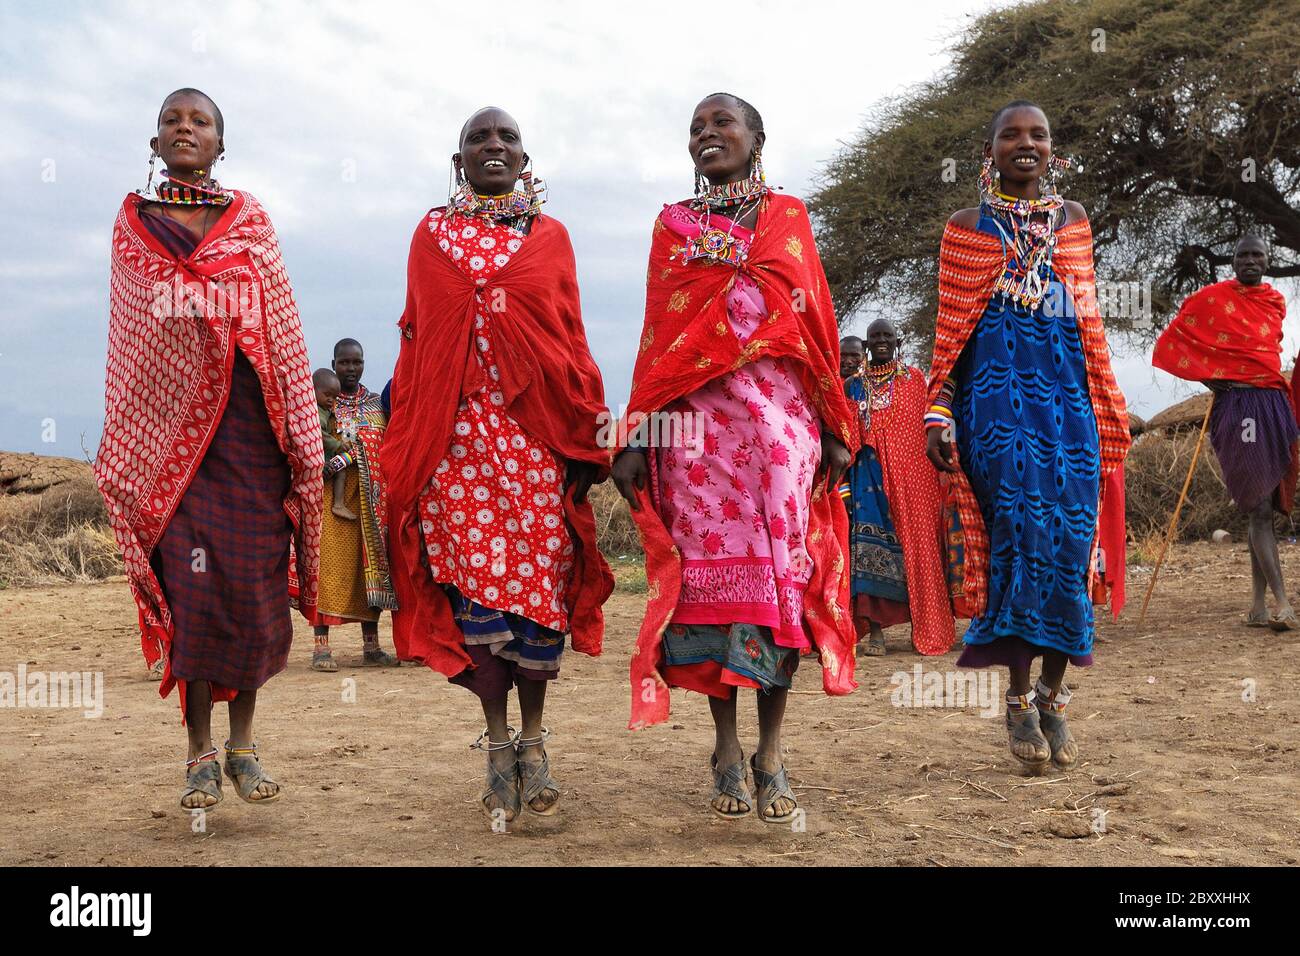 MASAI MARA, KENYA – AUGUST 23: Group of unidentified African women from Masai tribe show a traditional Jump dance on August 23, 2010 in a local villag Stock Photo